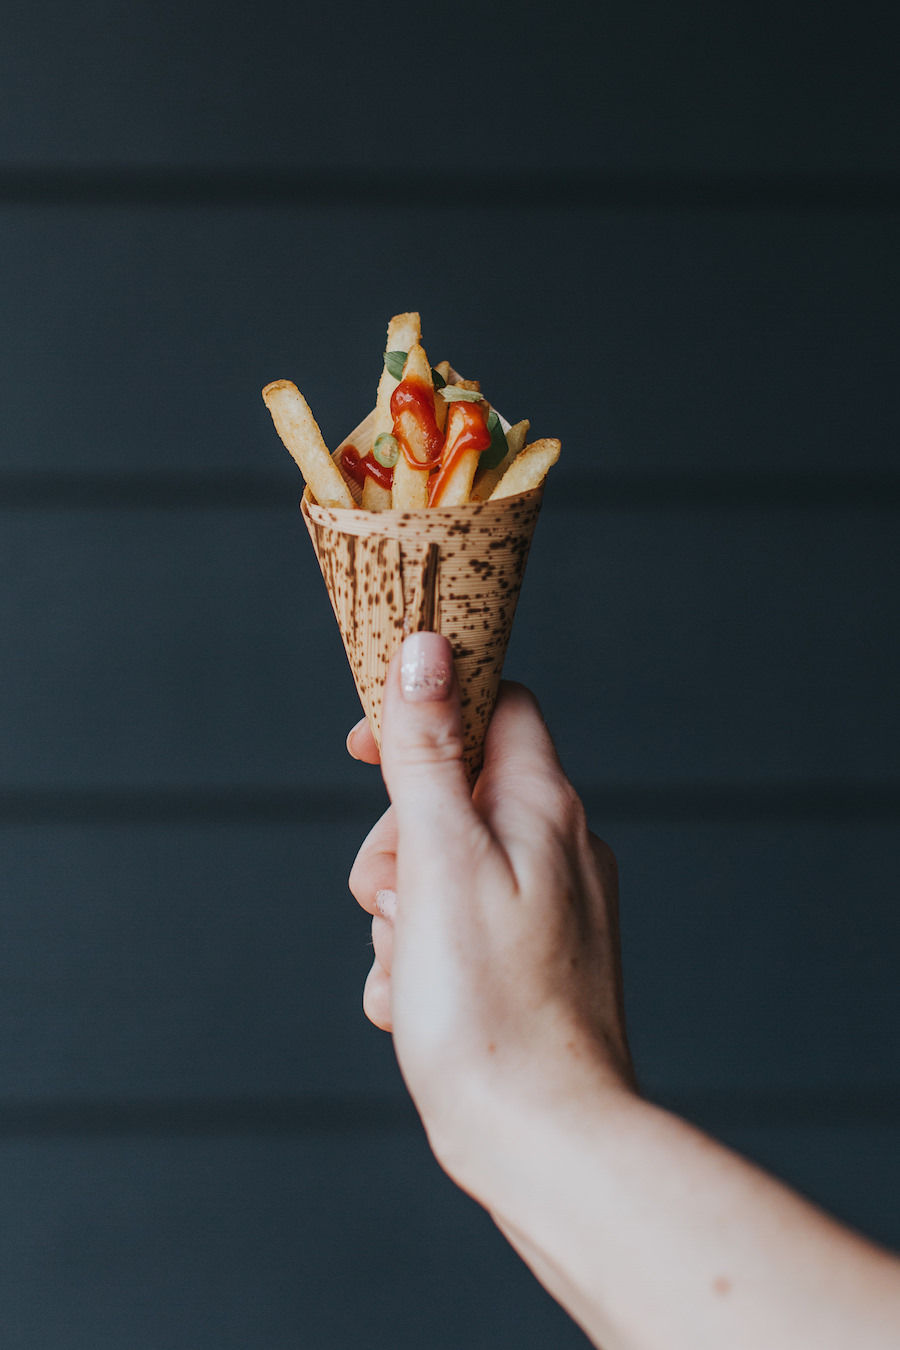 Artisan Handheld French Fry Holders for Wedding Snacks | Tampa Wedding and Event Catering Company SaltBlock Catering